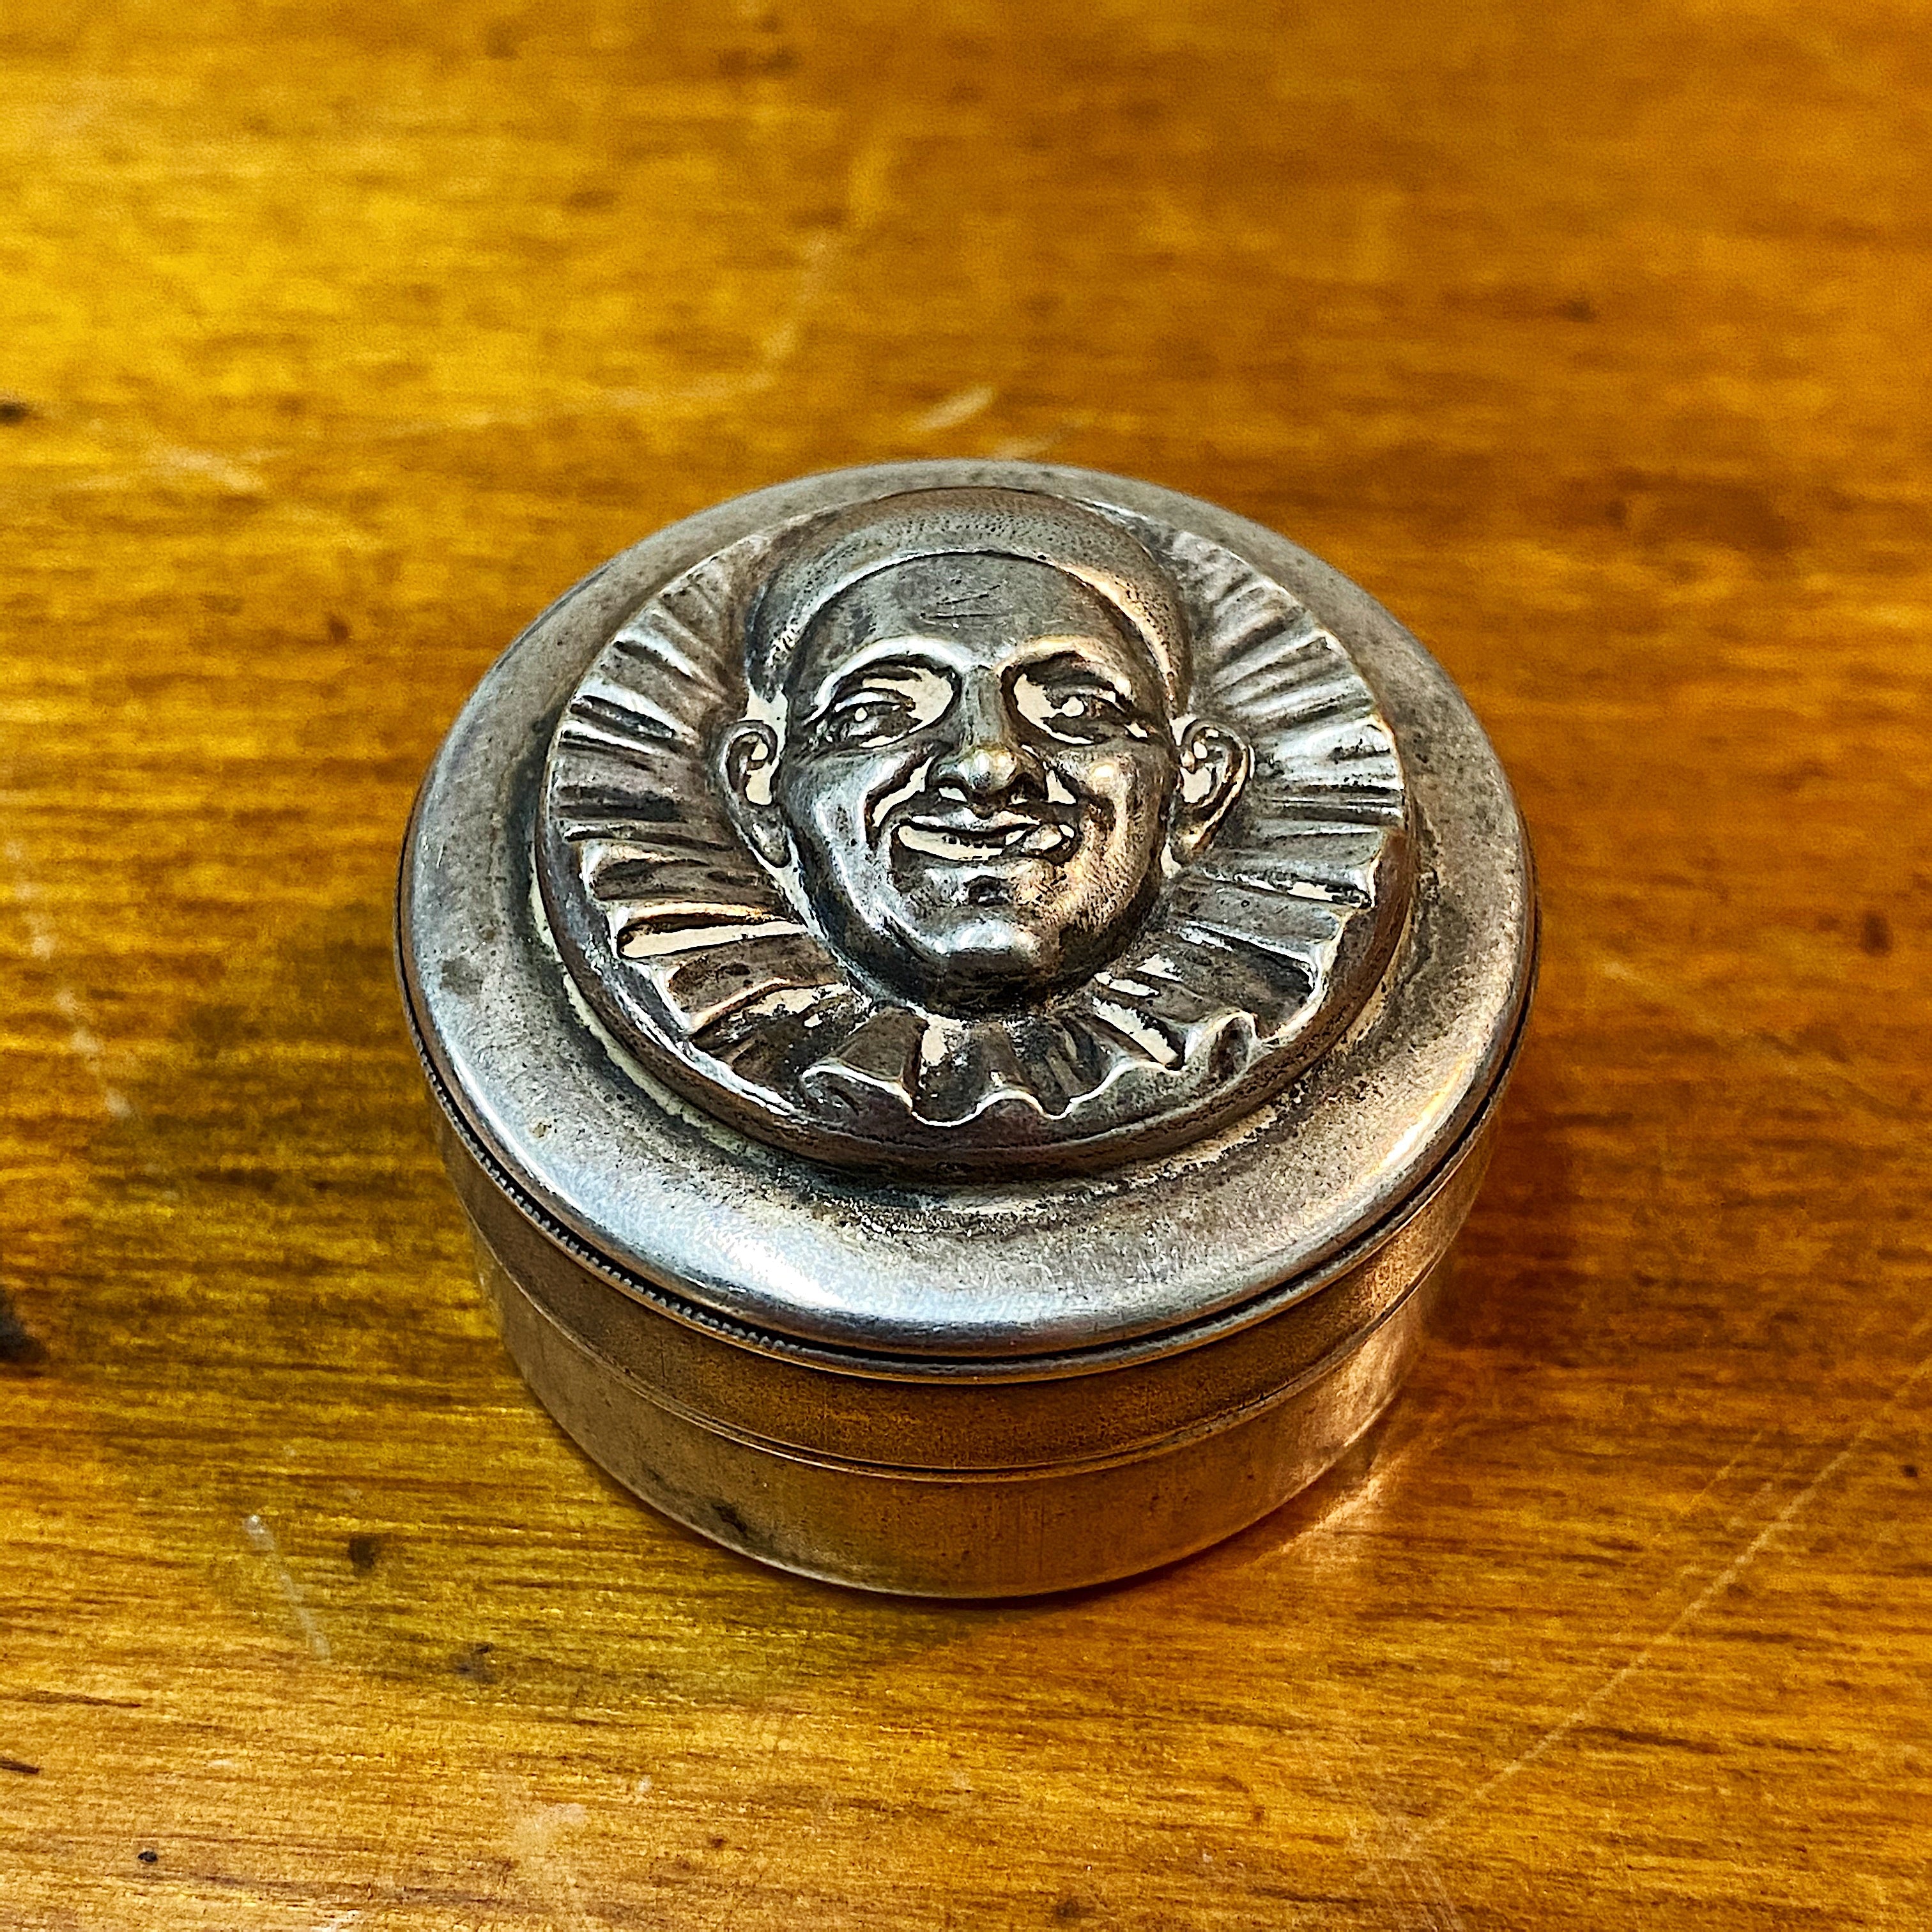 Antique Pill Box with Creepy Embossed Face - 1920s - Rare Silver Snuff Opium Case - Unmarked - Unusual Underground - Vintage Silver Powder Weird